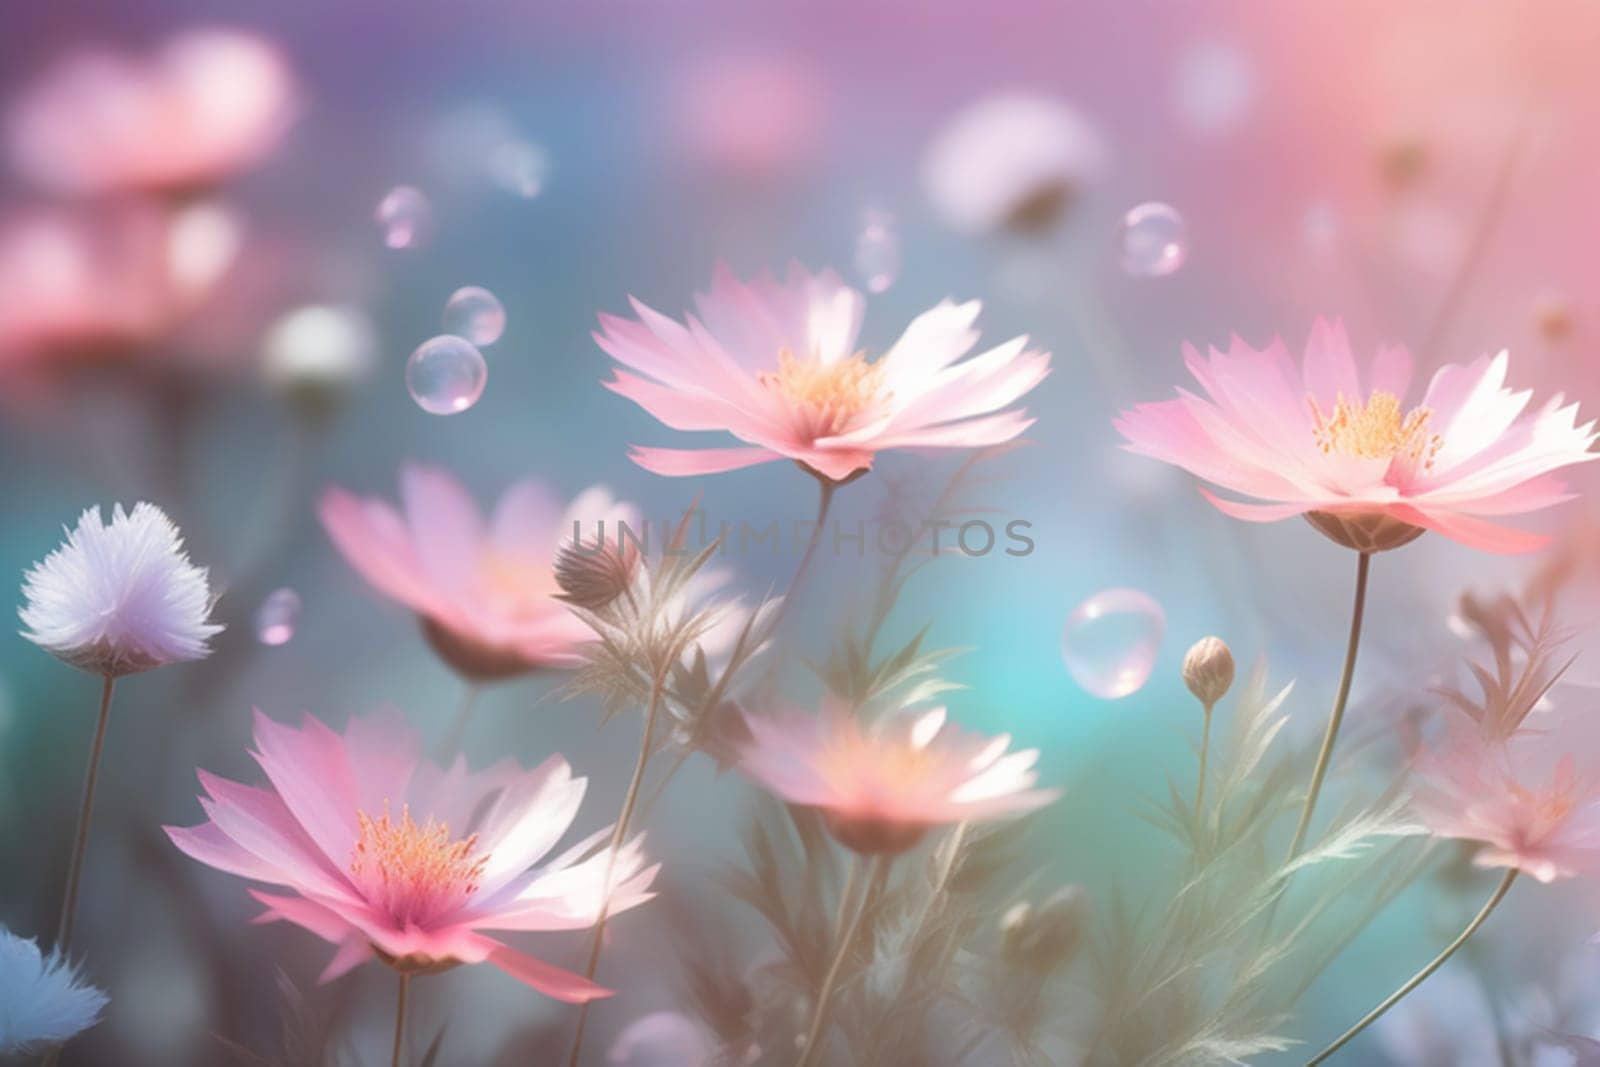 Soft pink small flowers outdoors in summer spring close up. A gentle dreamy image of the beauty of nature